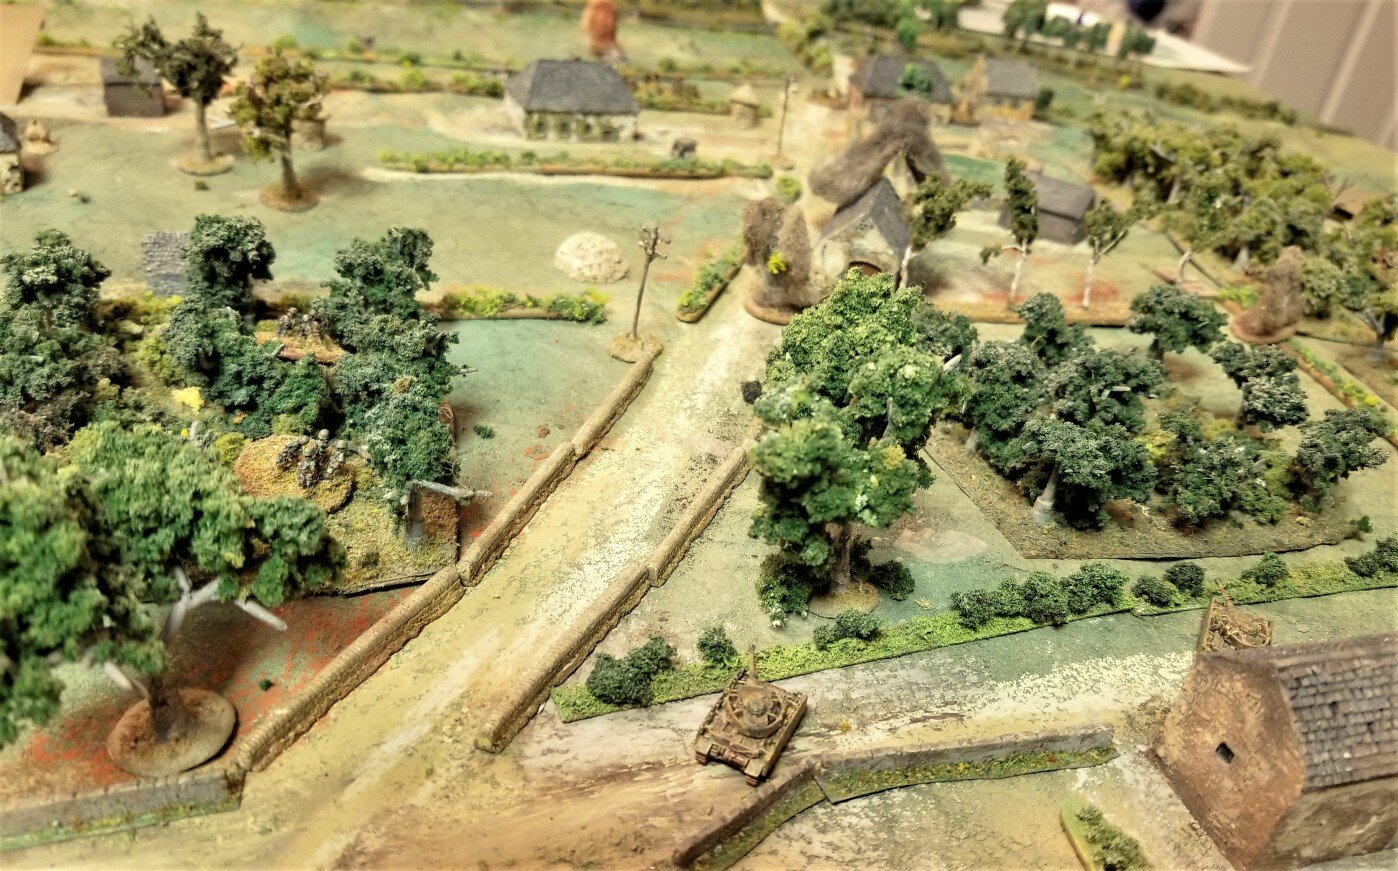 Panzers on the path and grenadiers in the orchard